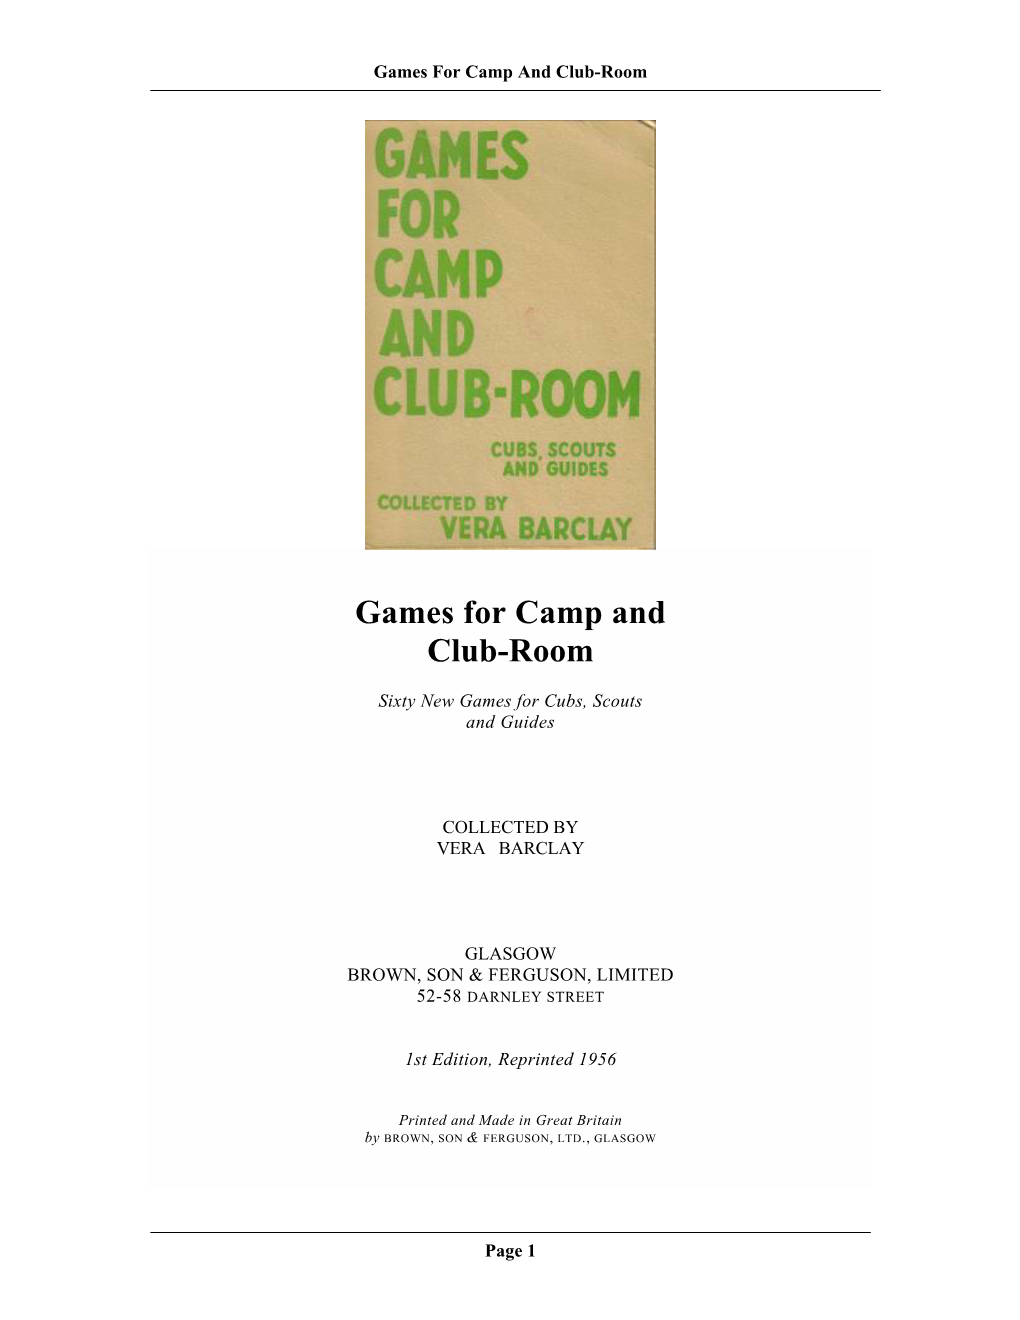 Games for Camp and Club-Room